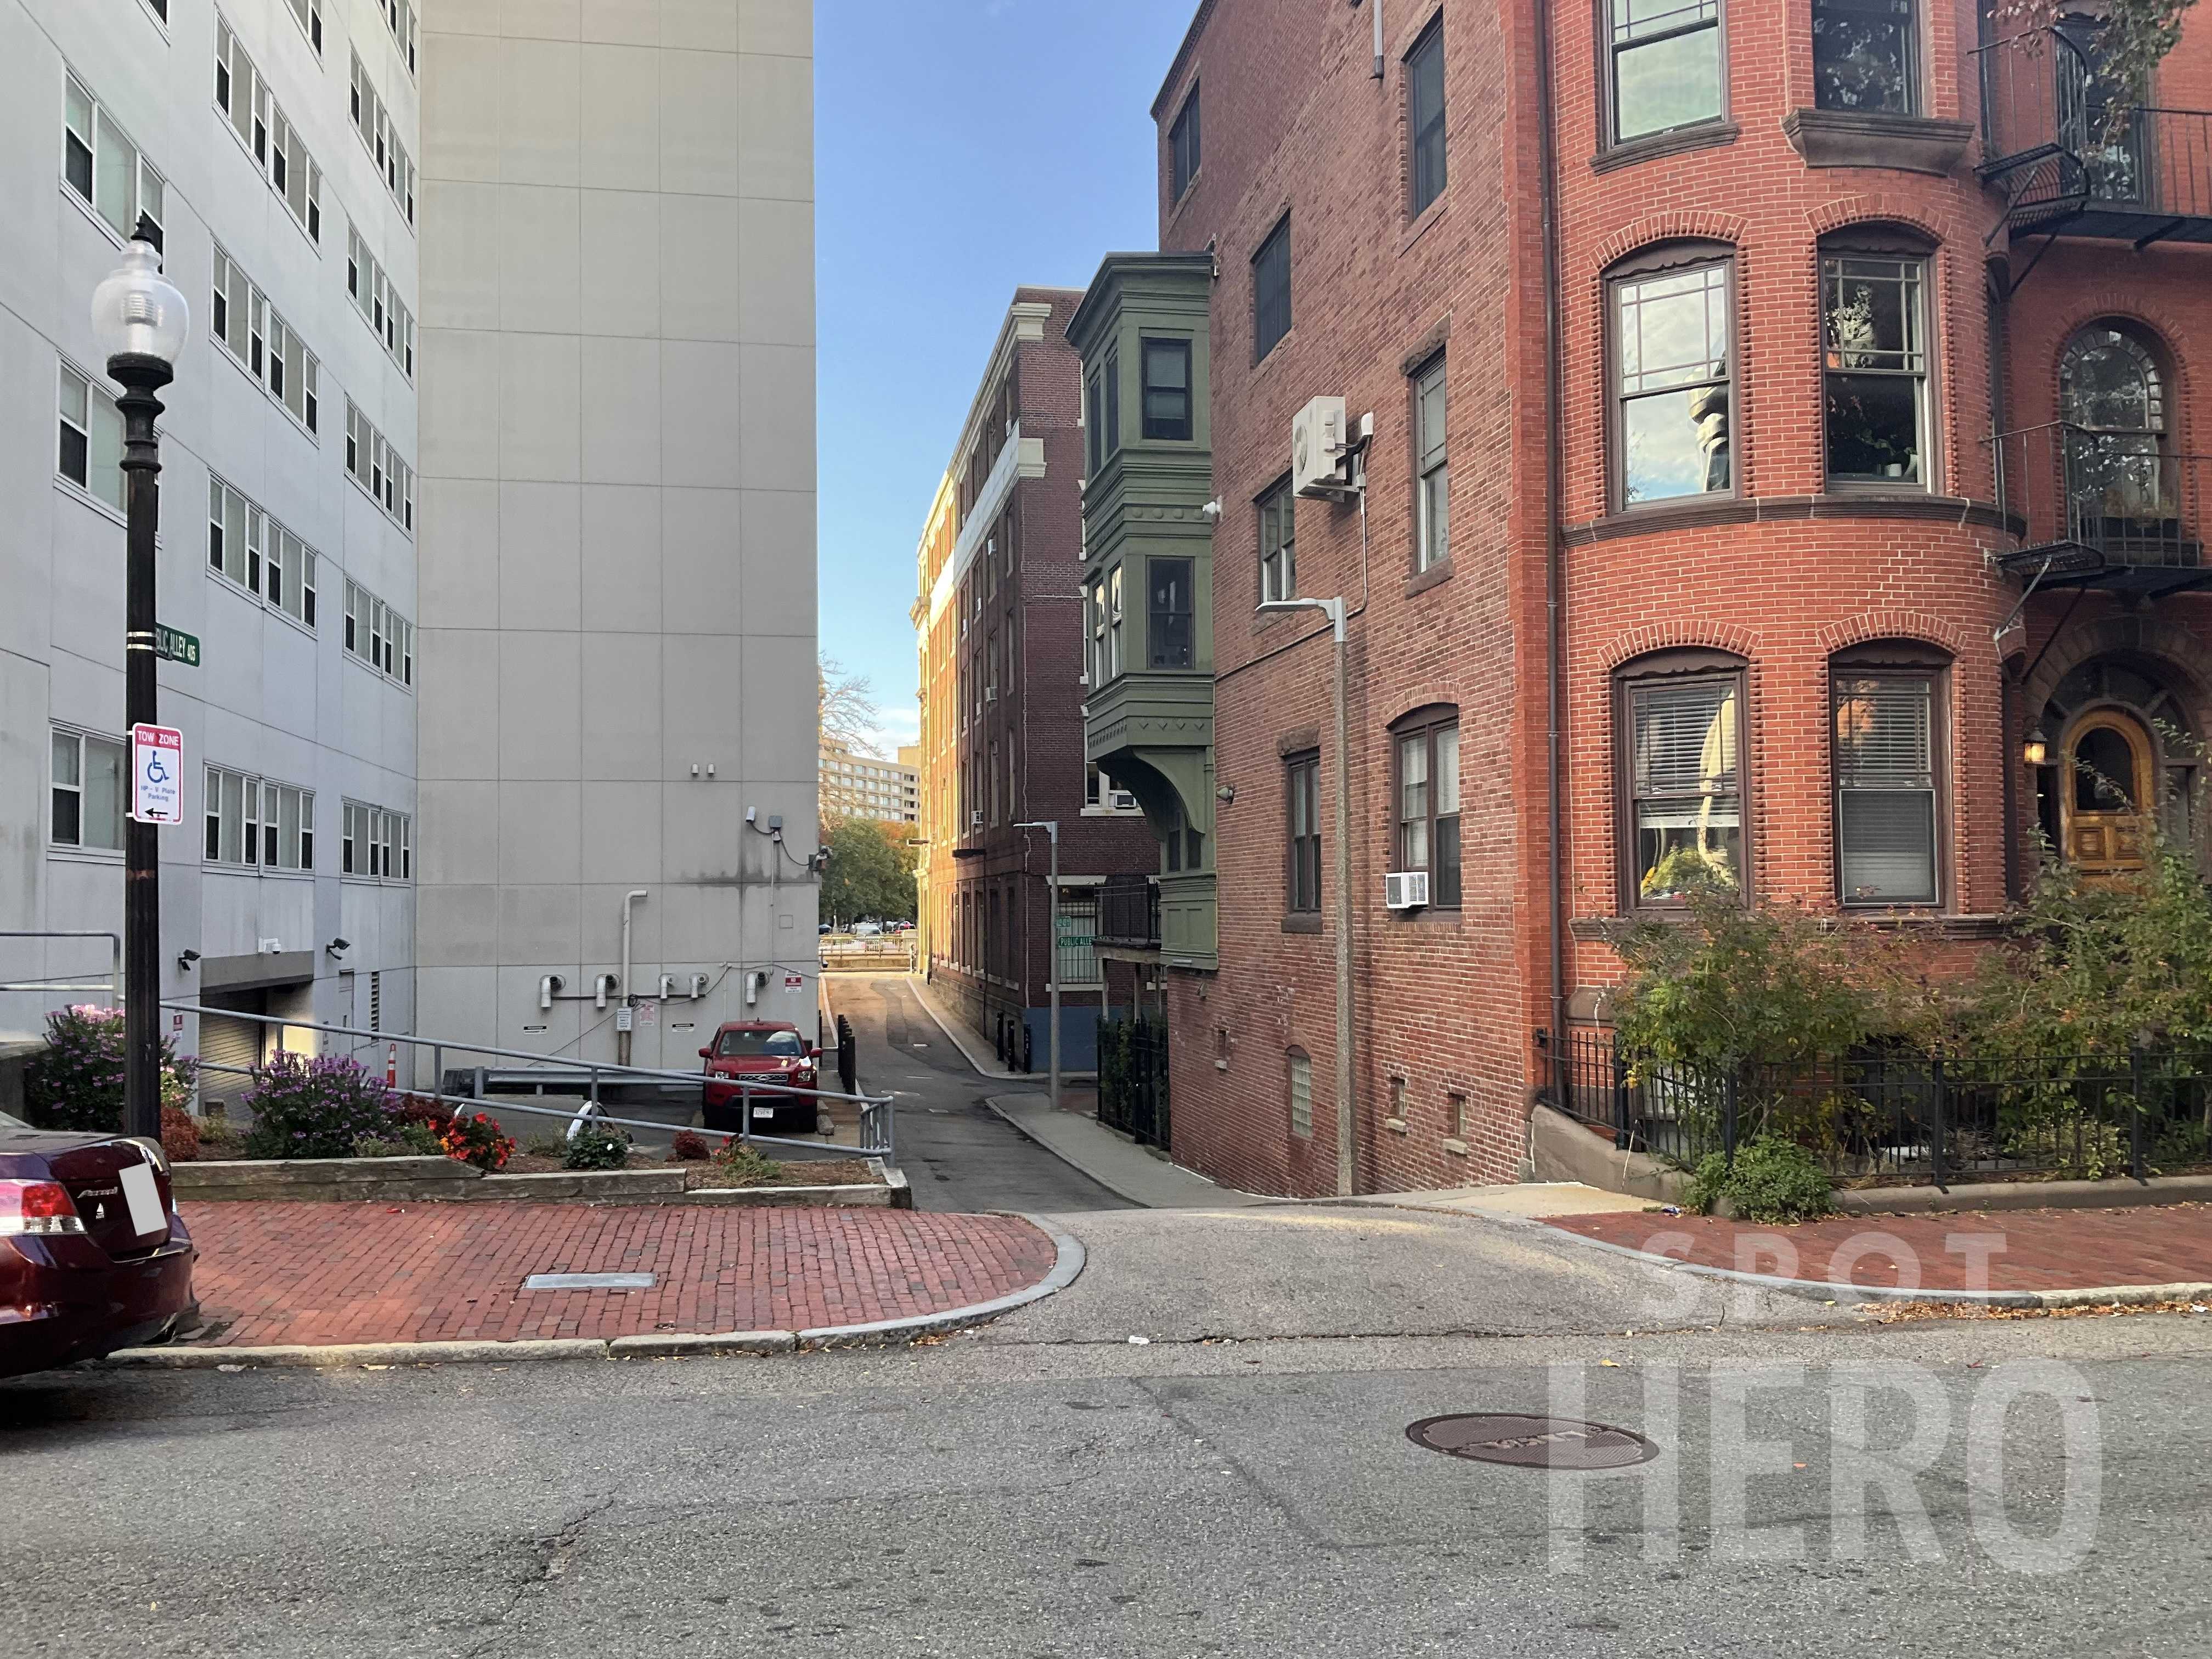 Monthly Outdoor lot Parking in Gainsborough St Boston MA 2115 Available Now  - (Spot 637942)